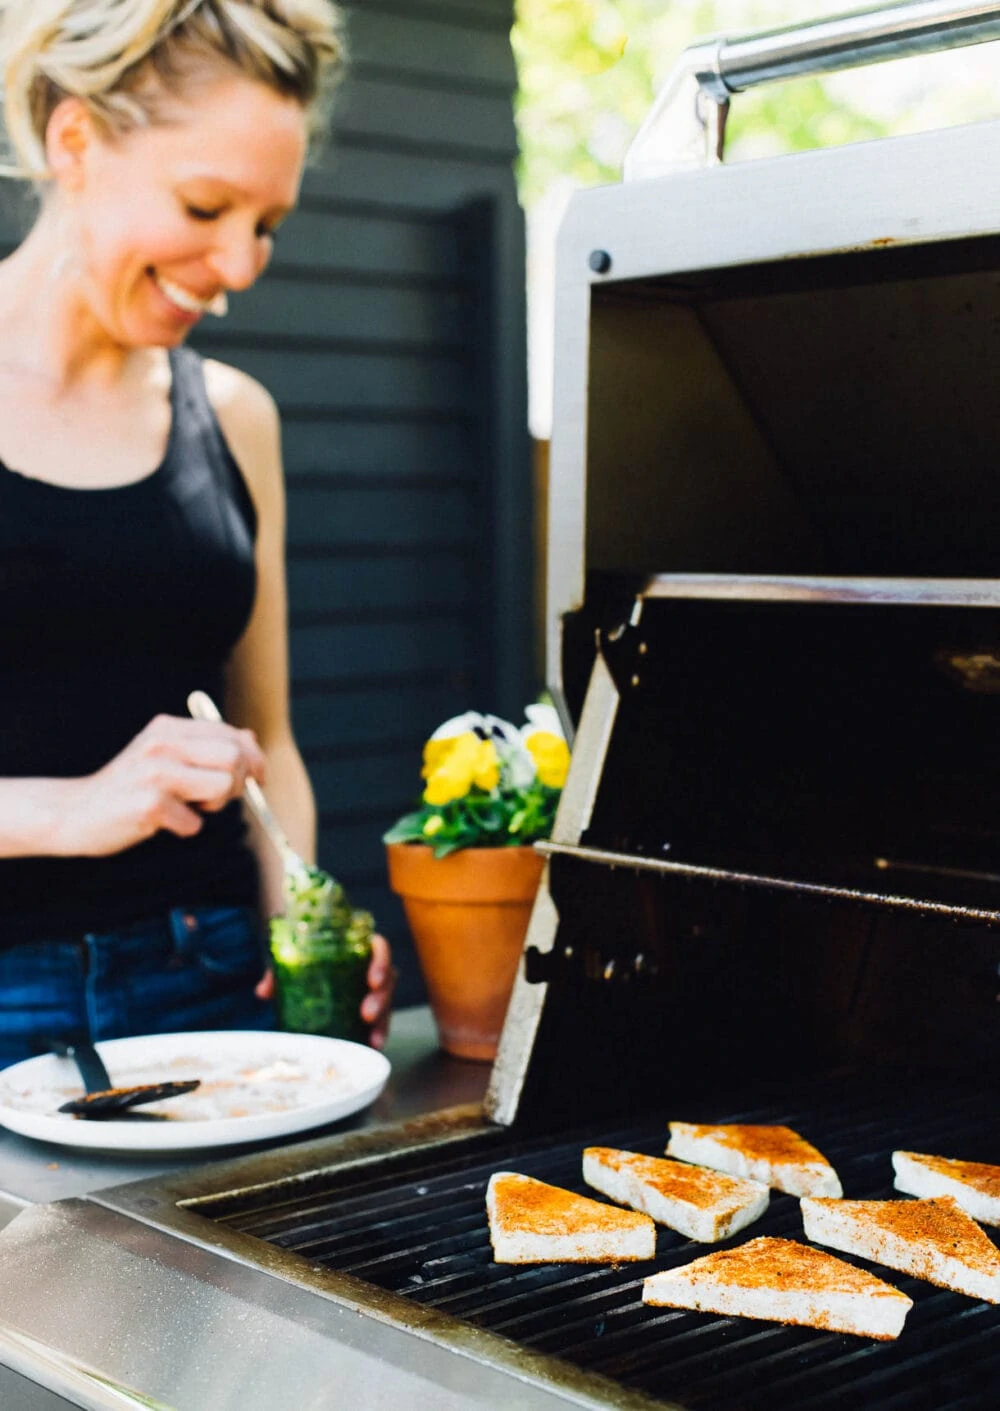 woman with blond hair grilling tofu